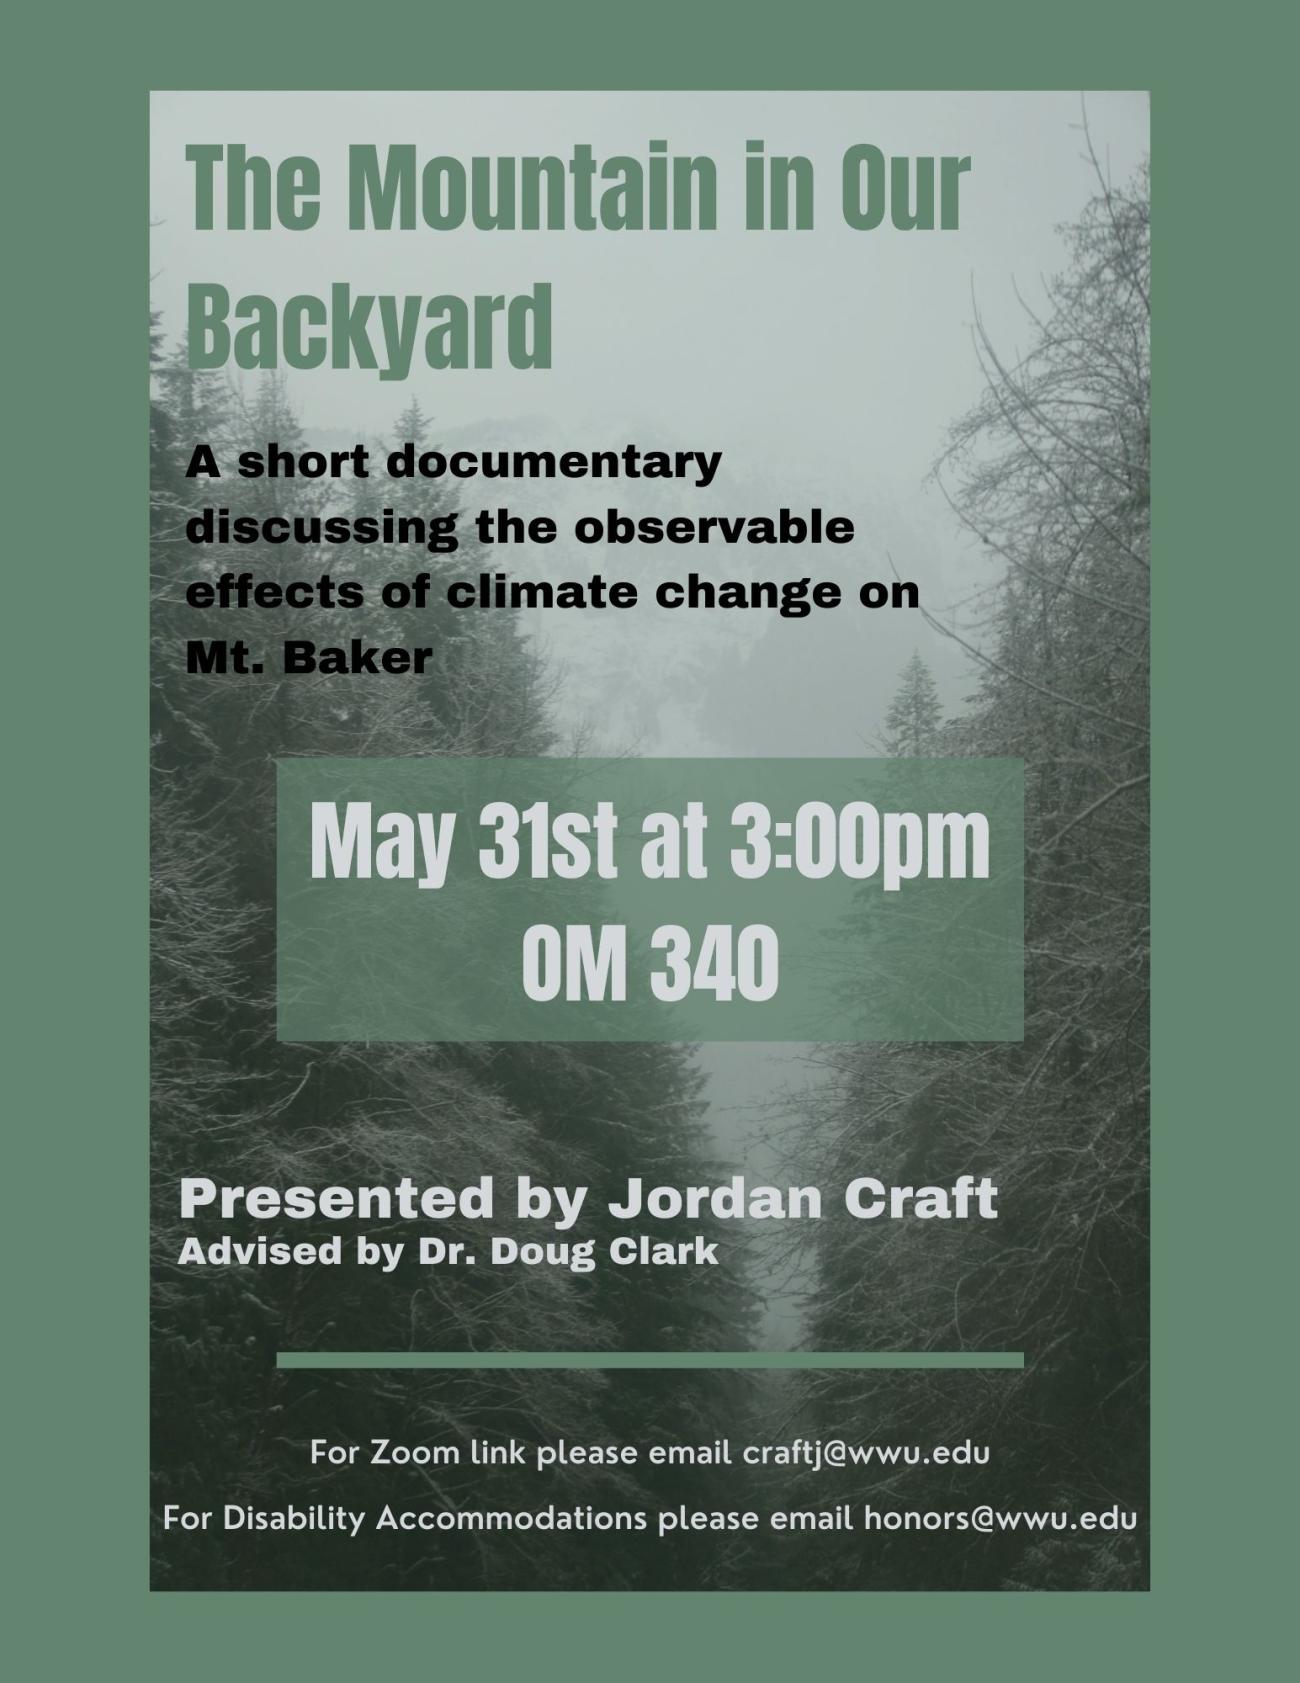 Poster with fog surrounding snow covered trees with Mt. Baker in the background. Image is surrounded by a green border. The text reads: "The Mountain in Our Backyard, a short documentary discussing the observable effects of climate change on Mt. Baker. May 31st at 3:00pm in OM 340. Presented by Jordan Craft. Advised by Doug Clark. For Zoom link please email craftj@wwu.edu. For disability accommodations please email honors@wwu.edu."